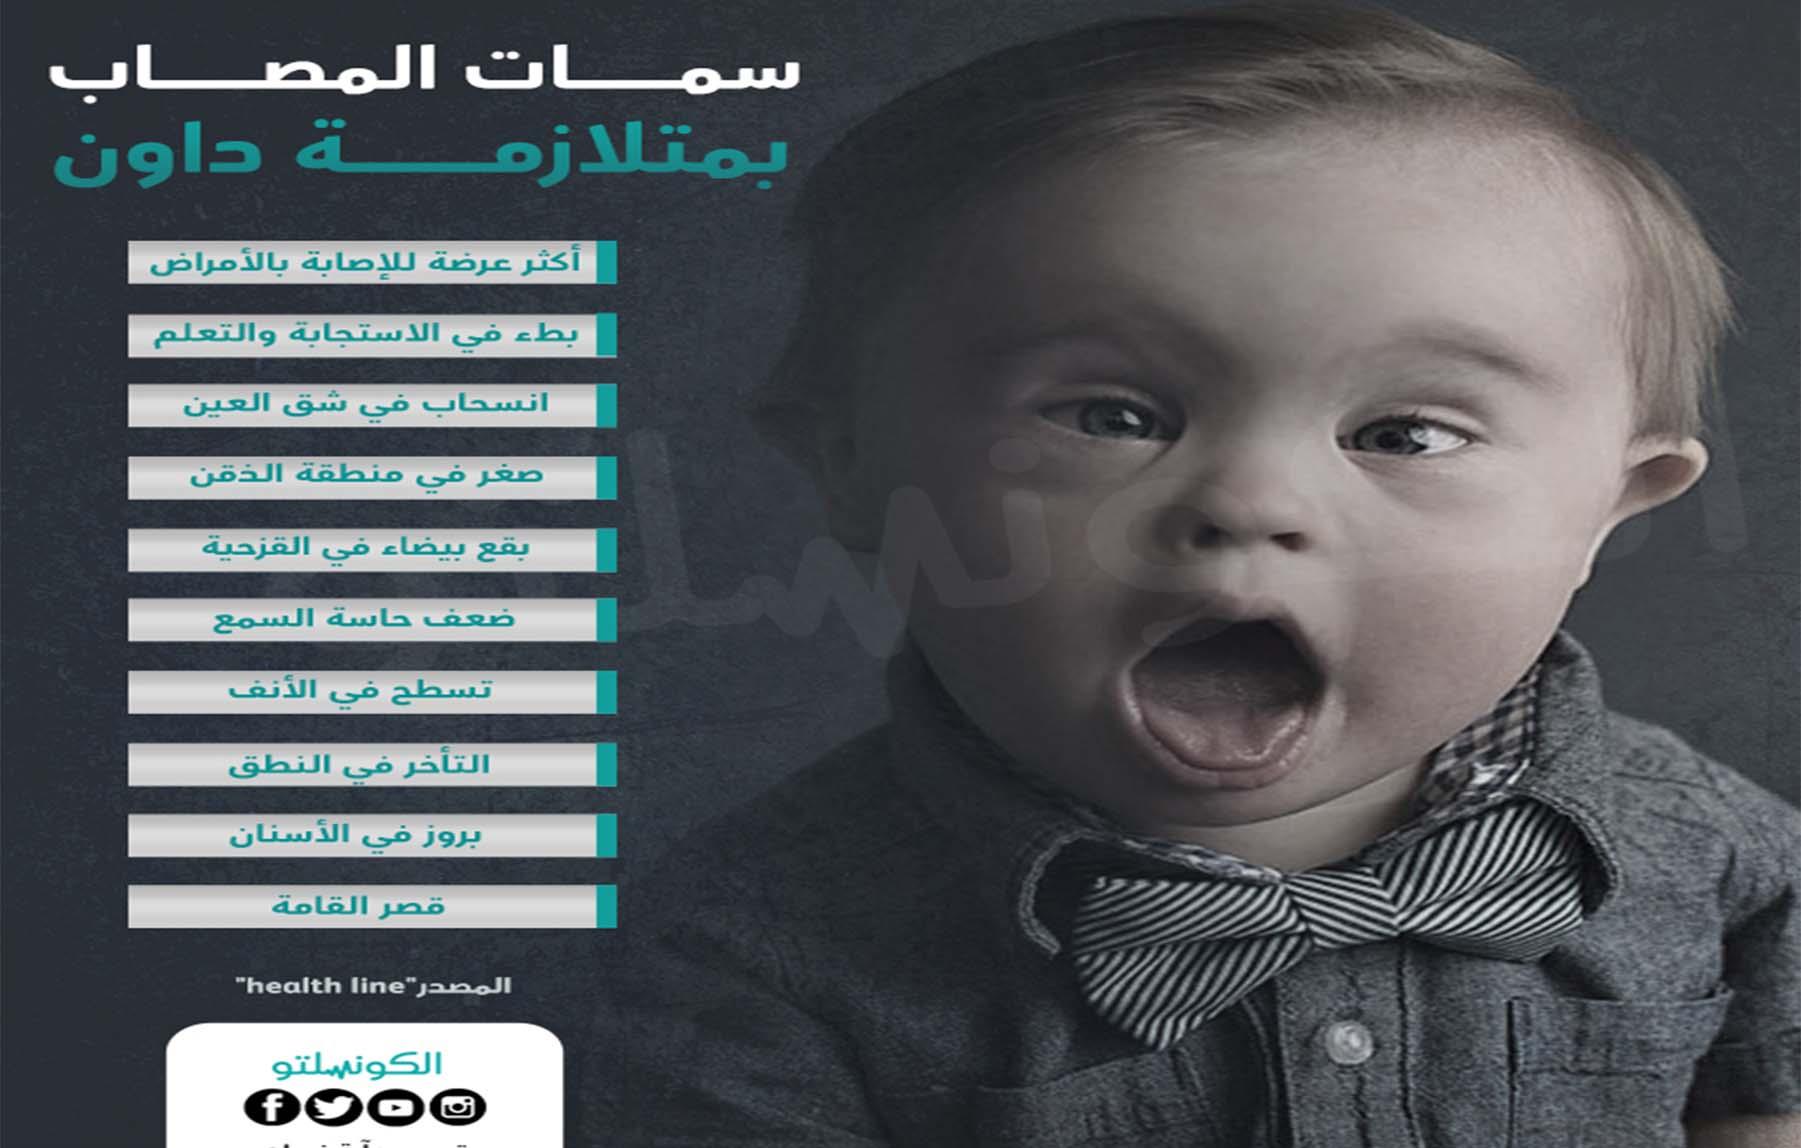 123-Recovered-Recovered-Recovered_0004_سمات-المصاب-بمتلازمة-داون